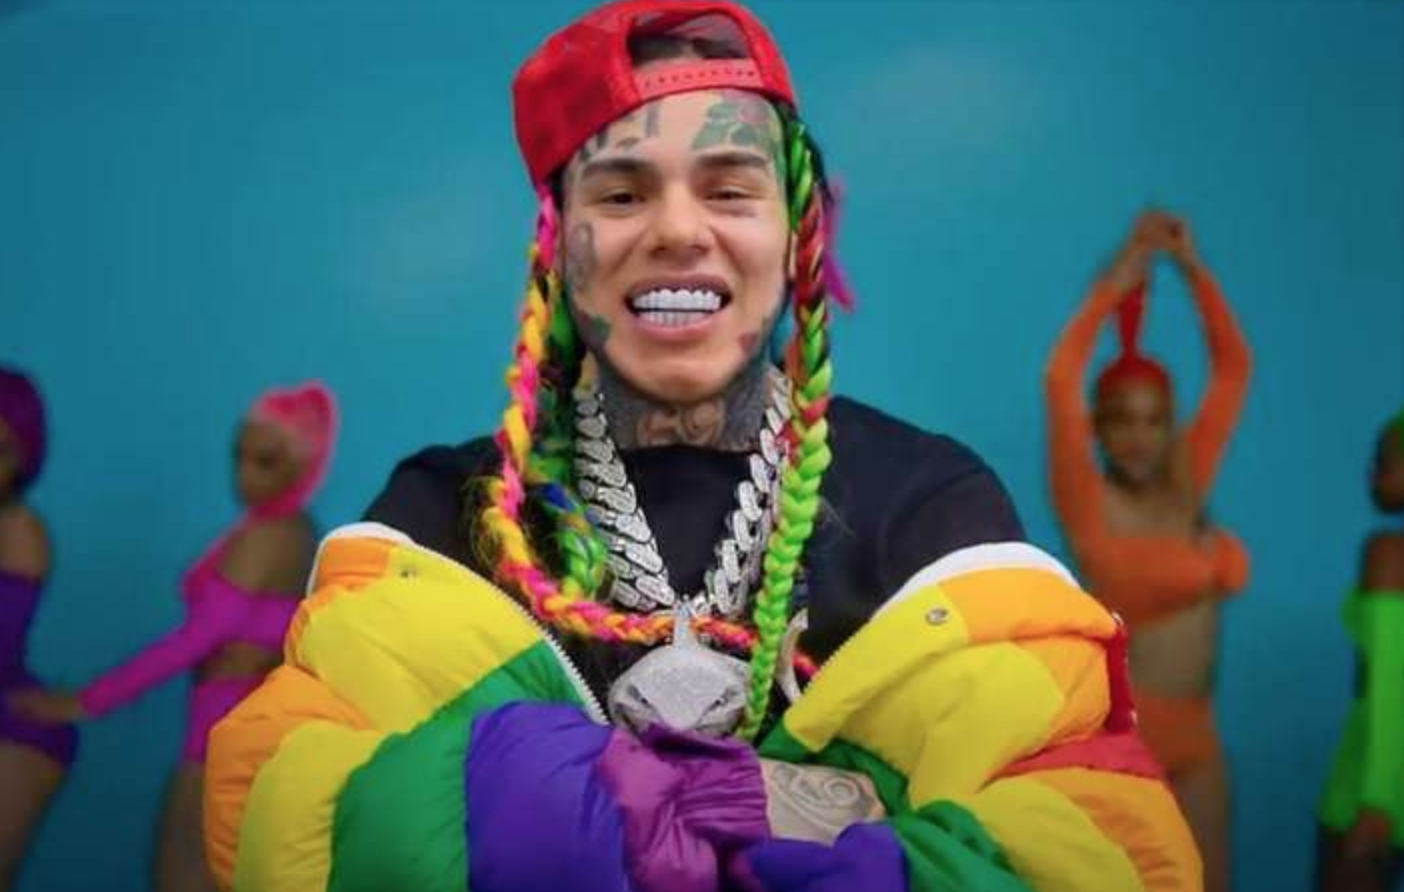 Tekashi 6ix9ine Kicked Out Of Apartment Complex For Bodyguards Carrying Guns